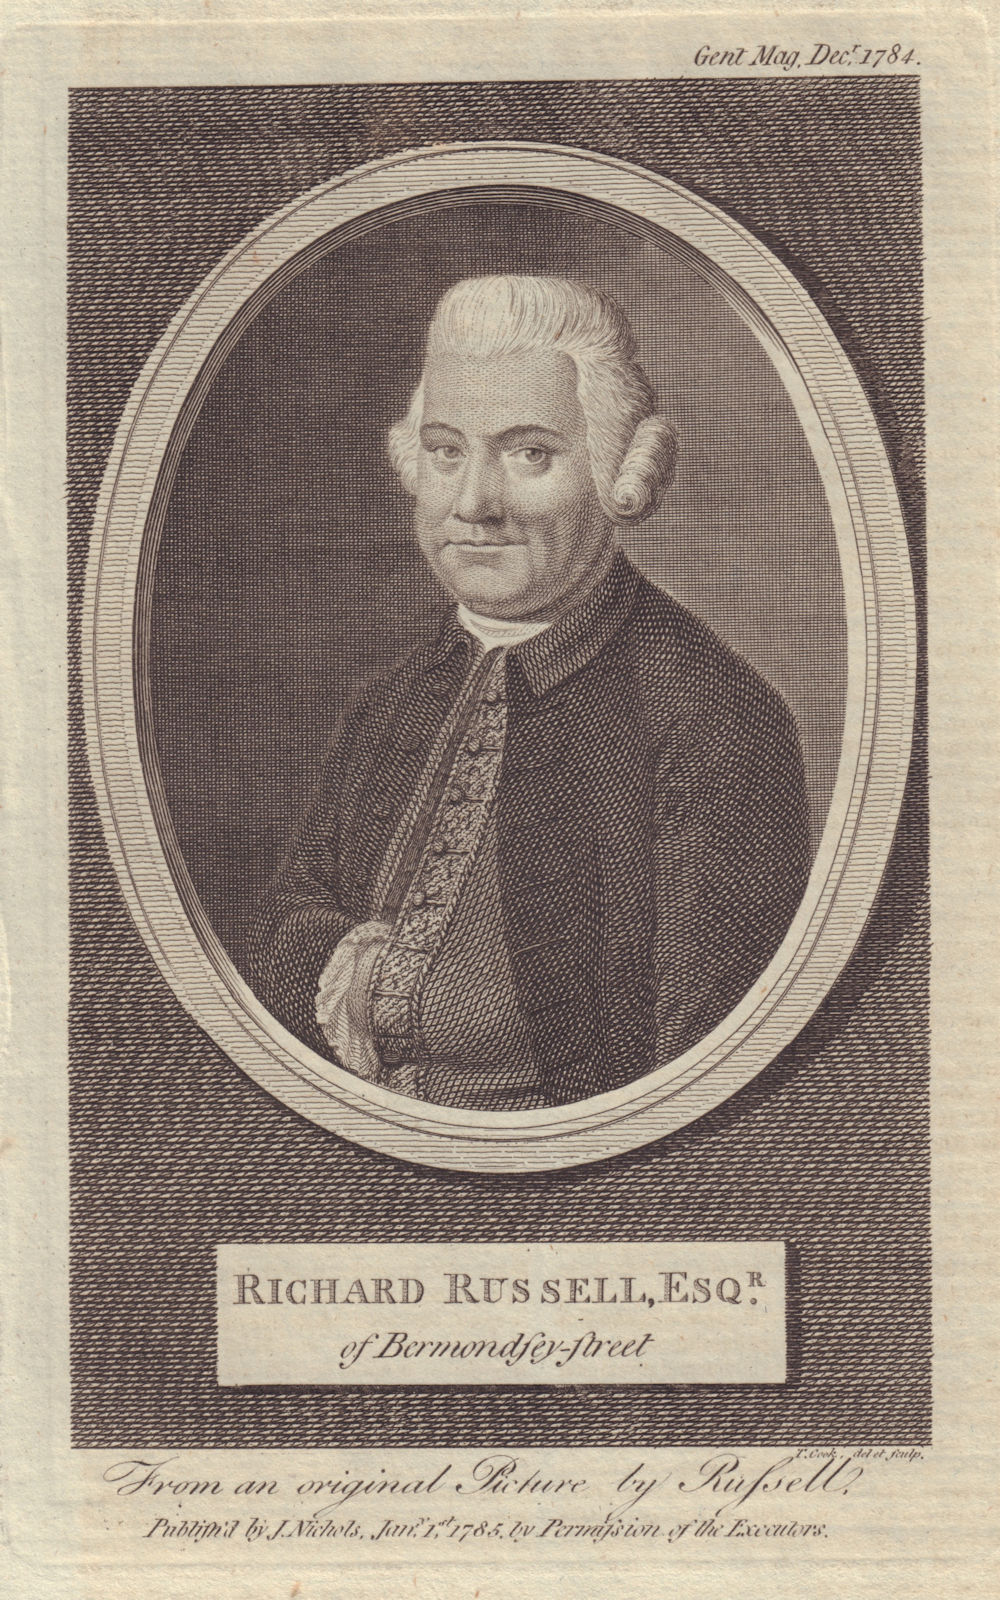 Associate Product Richard Russell Esq.r of Bermondsey Street. GENTS MAG 1784 old antique print